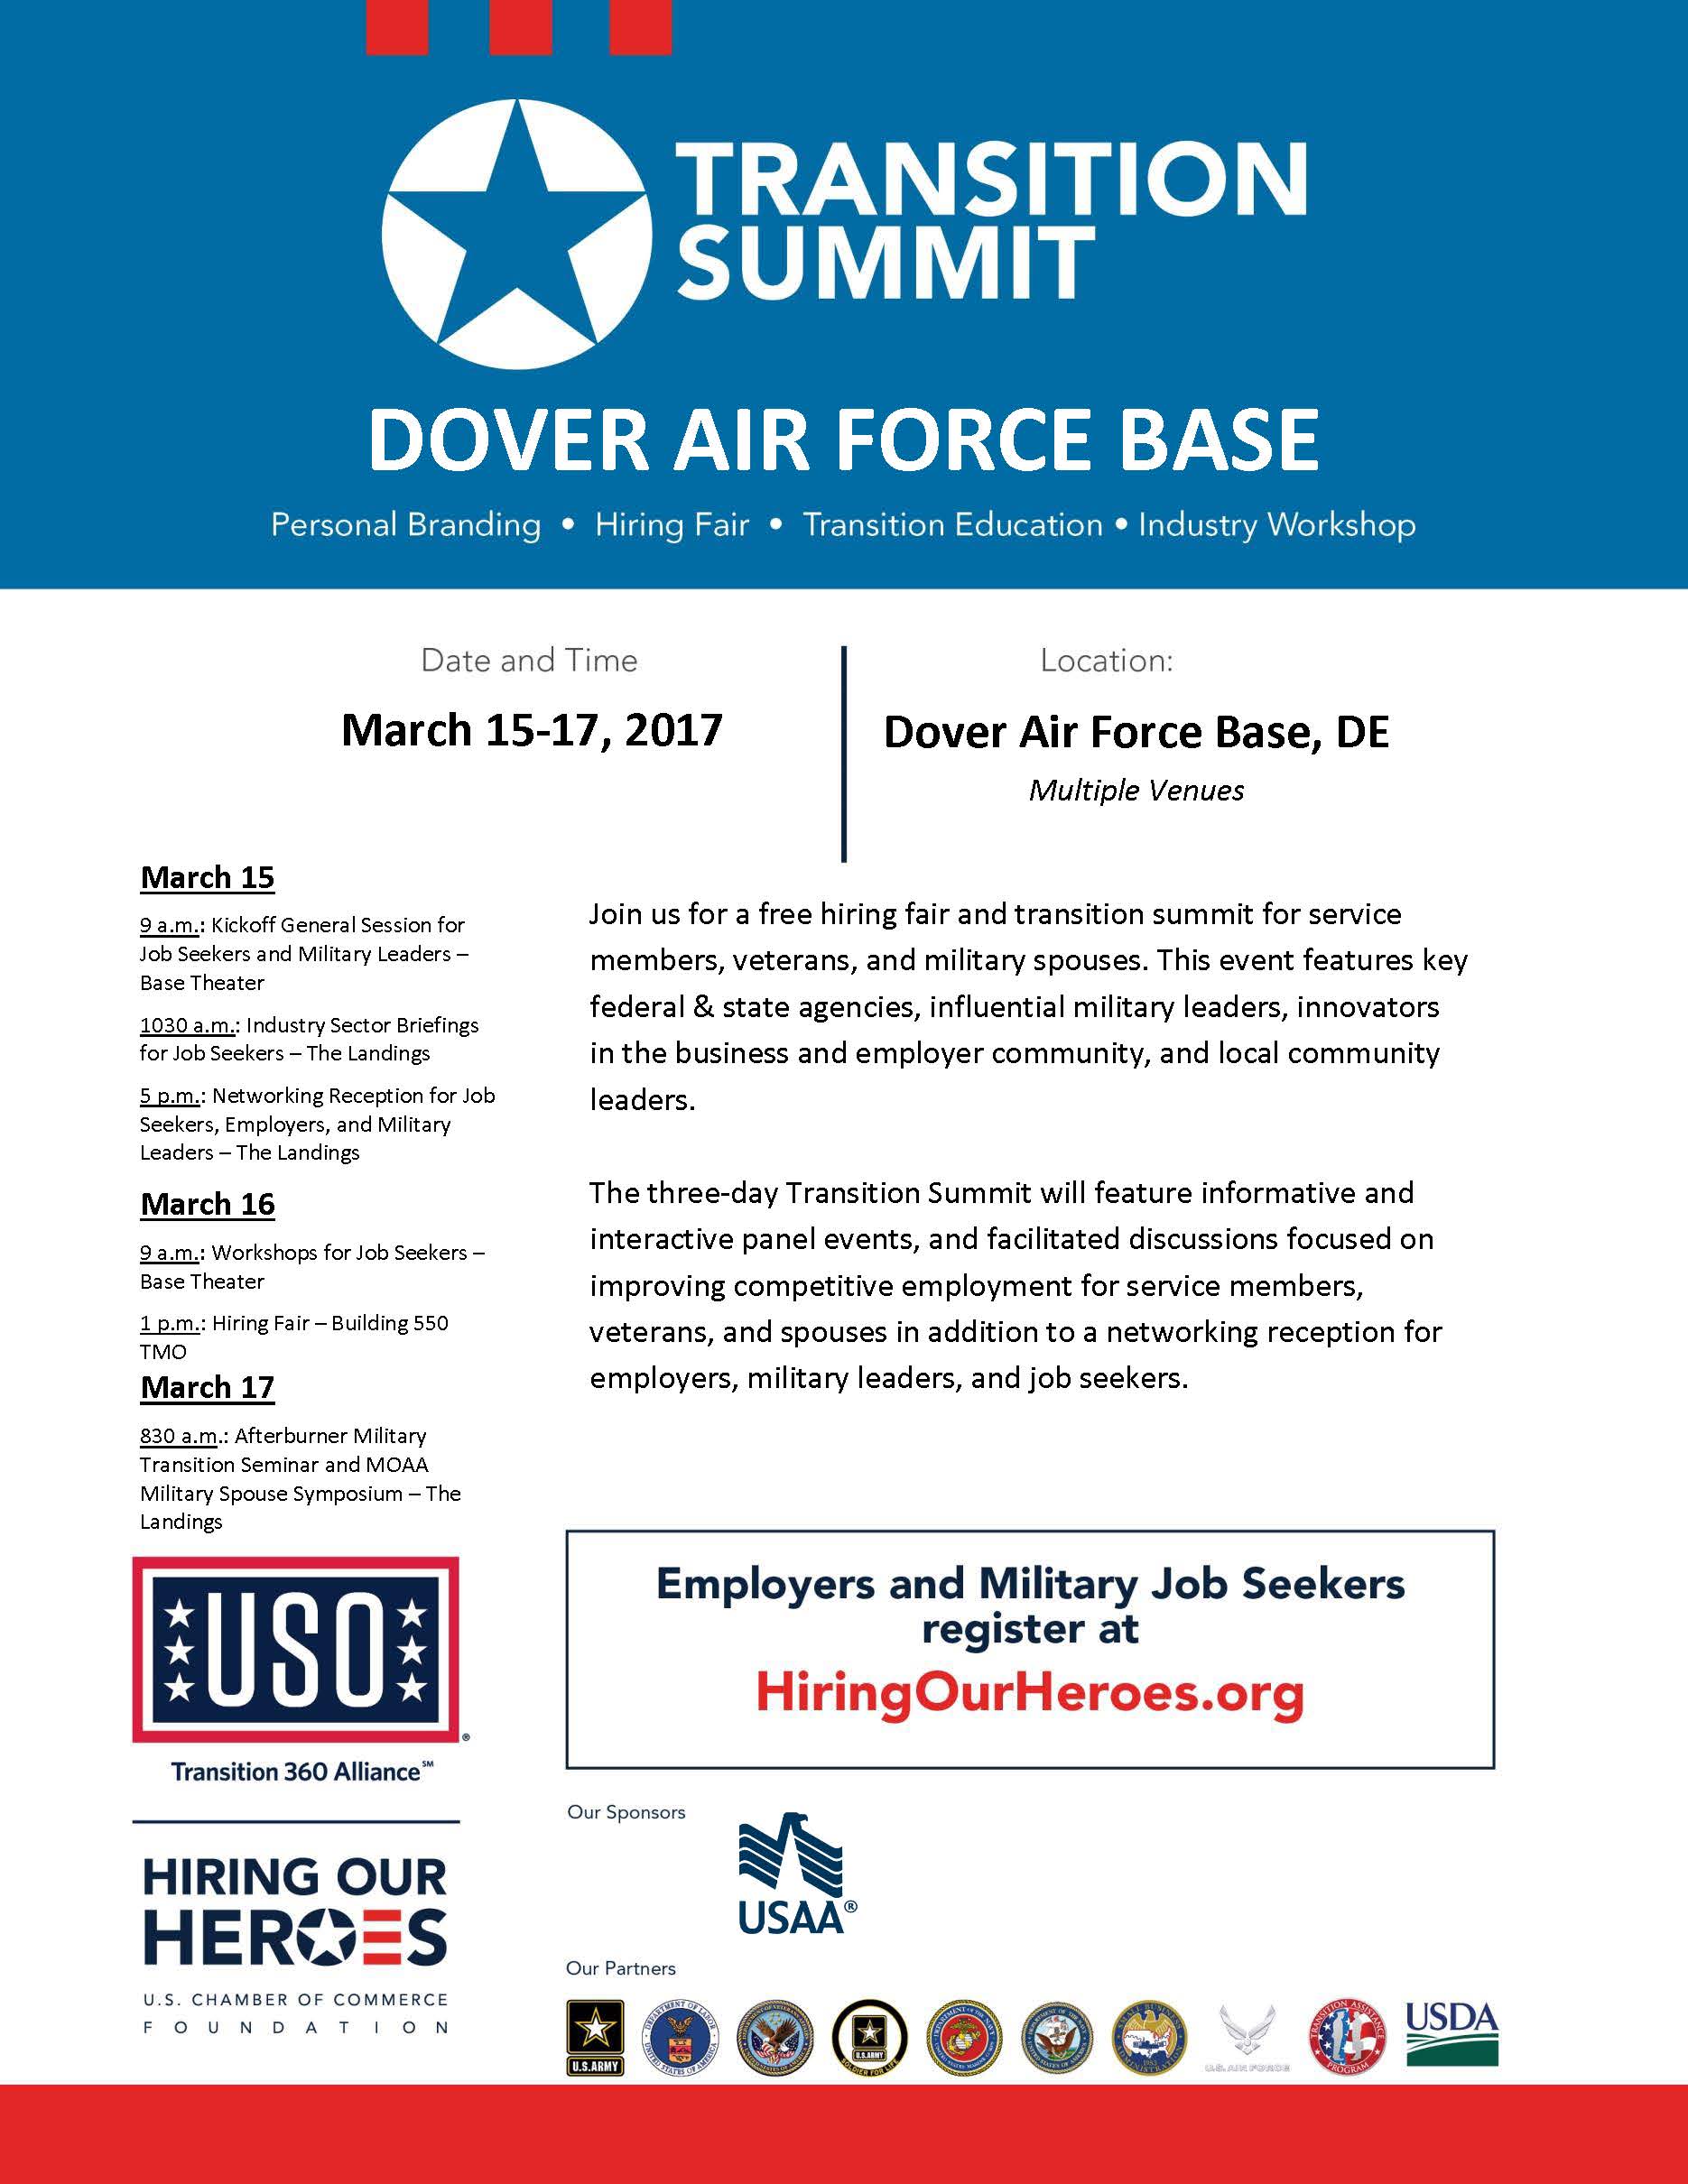 Transition Summit at Dover Air Force Base